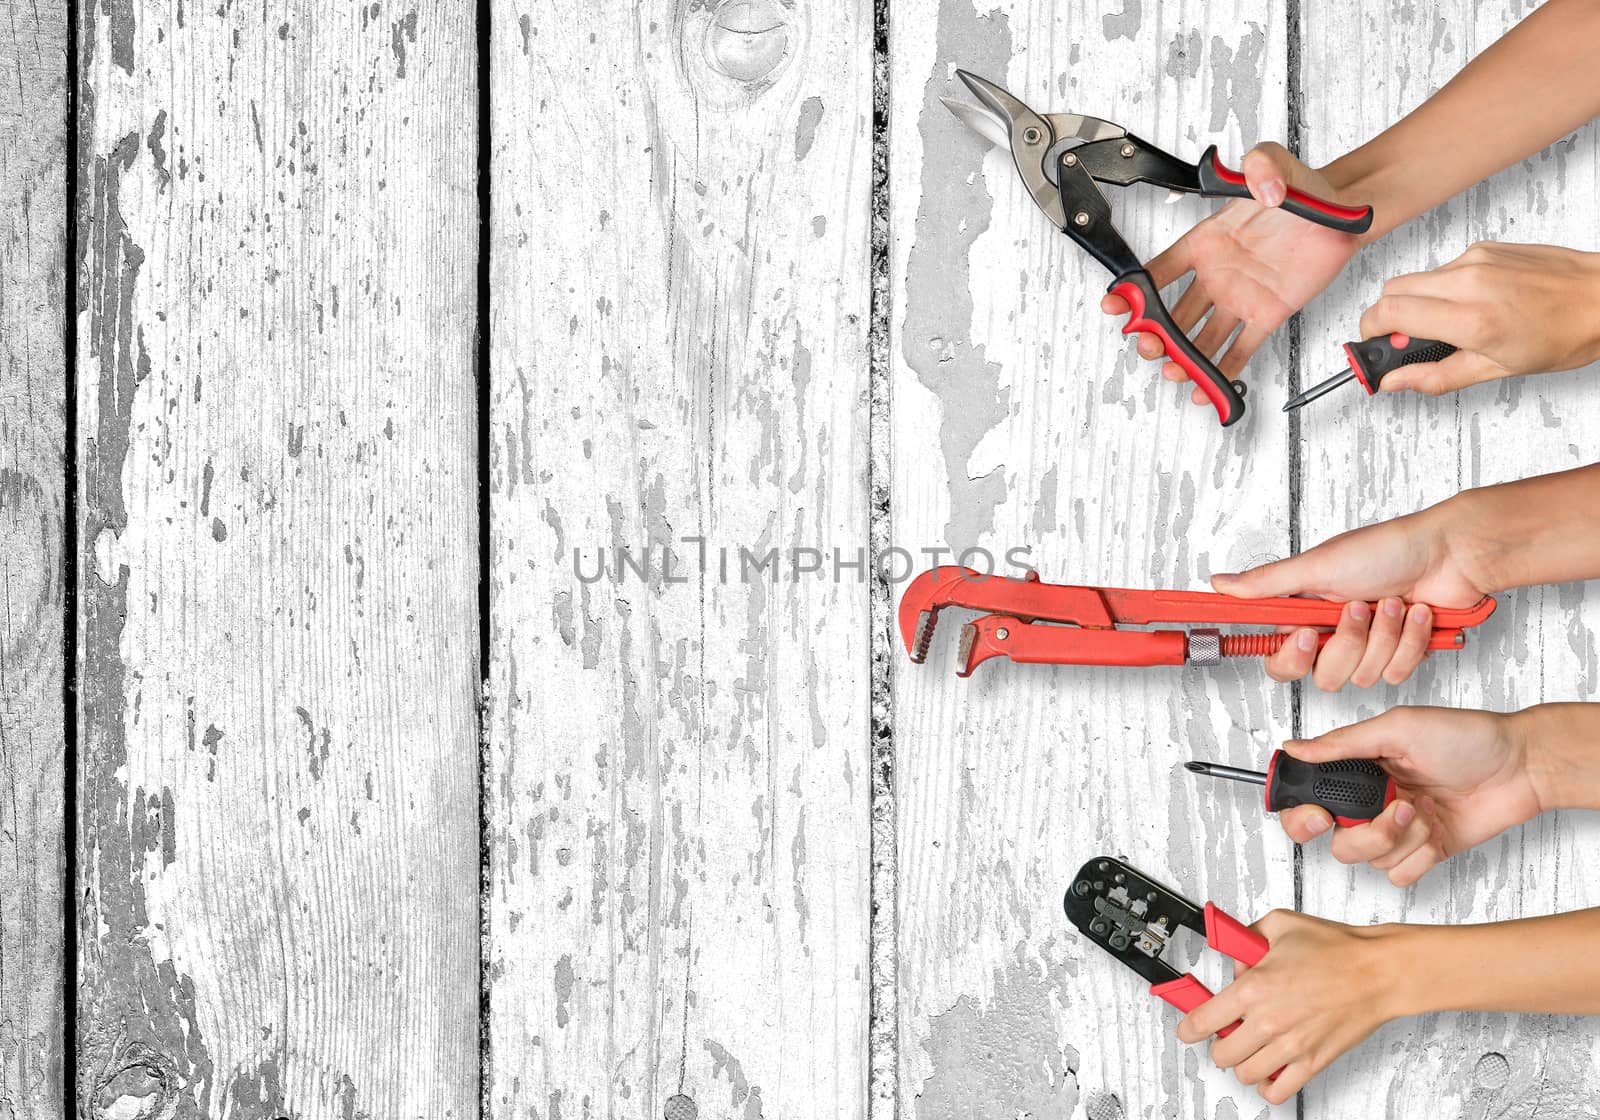 Set of peoples hands holding different tools on old white board texture background